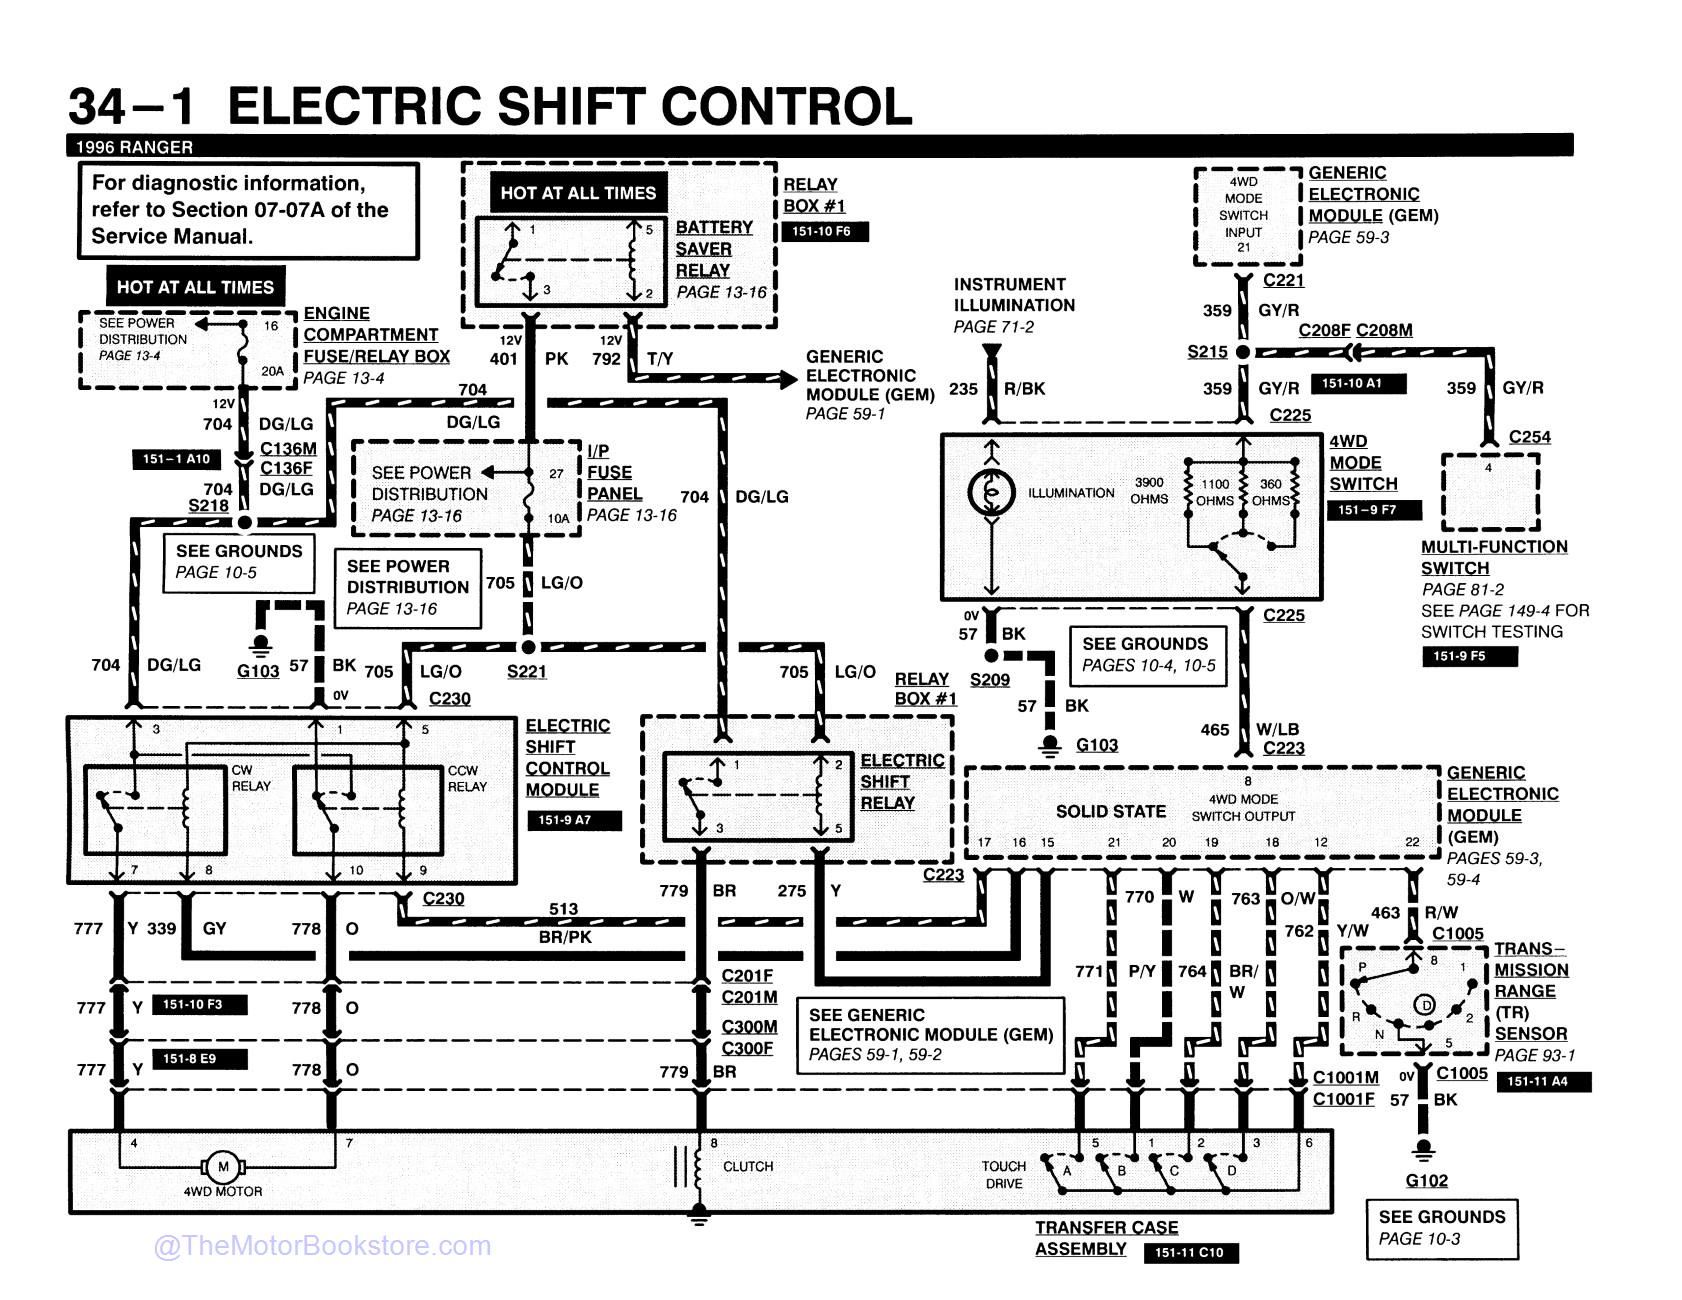 1996 Ford Ranger Electrical and Vacuum Troubleshooting Manual - Sample Page